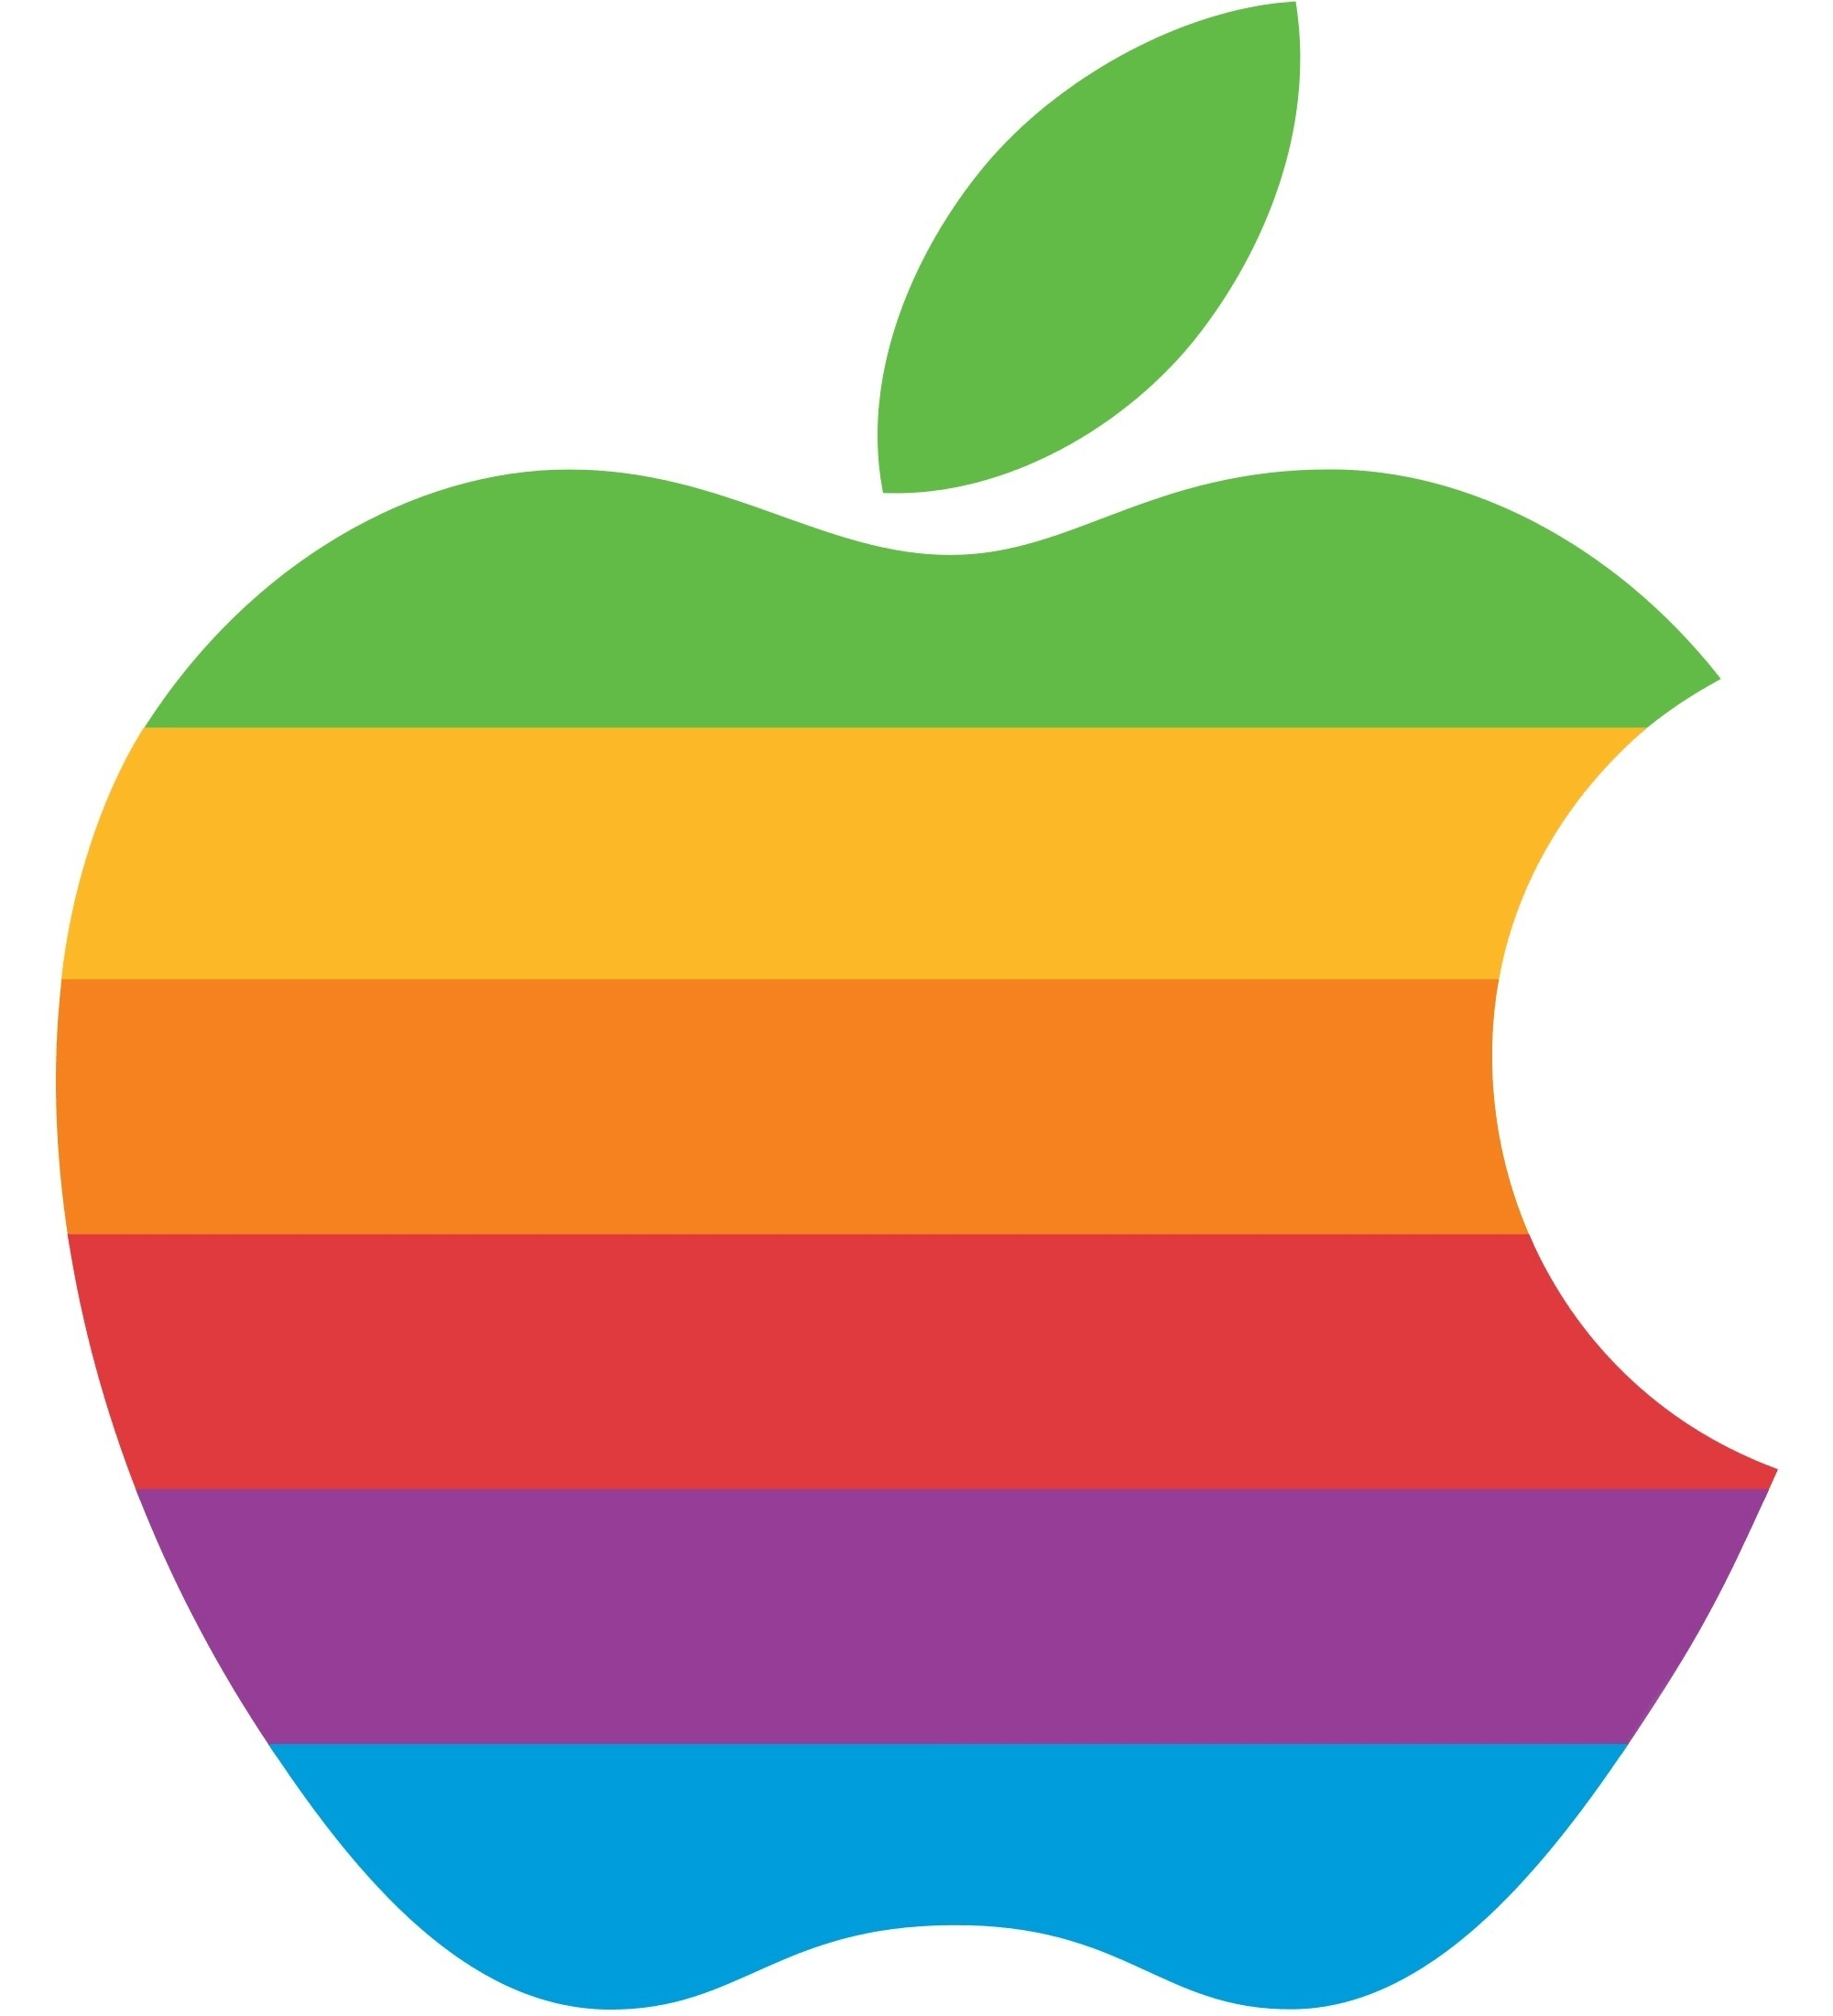 Anniversaries Are A Good Time To Look A Back And Reflect - Rainbow Apple Logo (6000x2200)